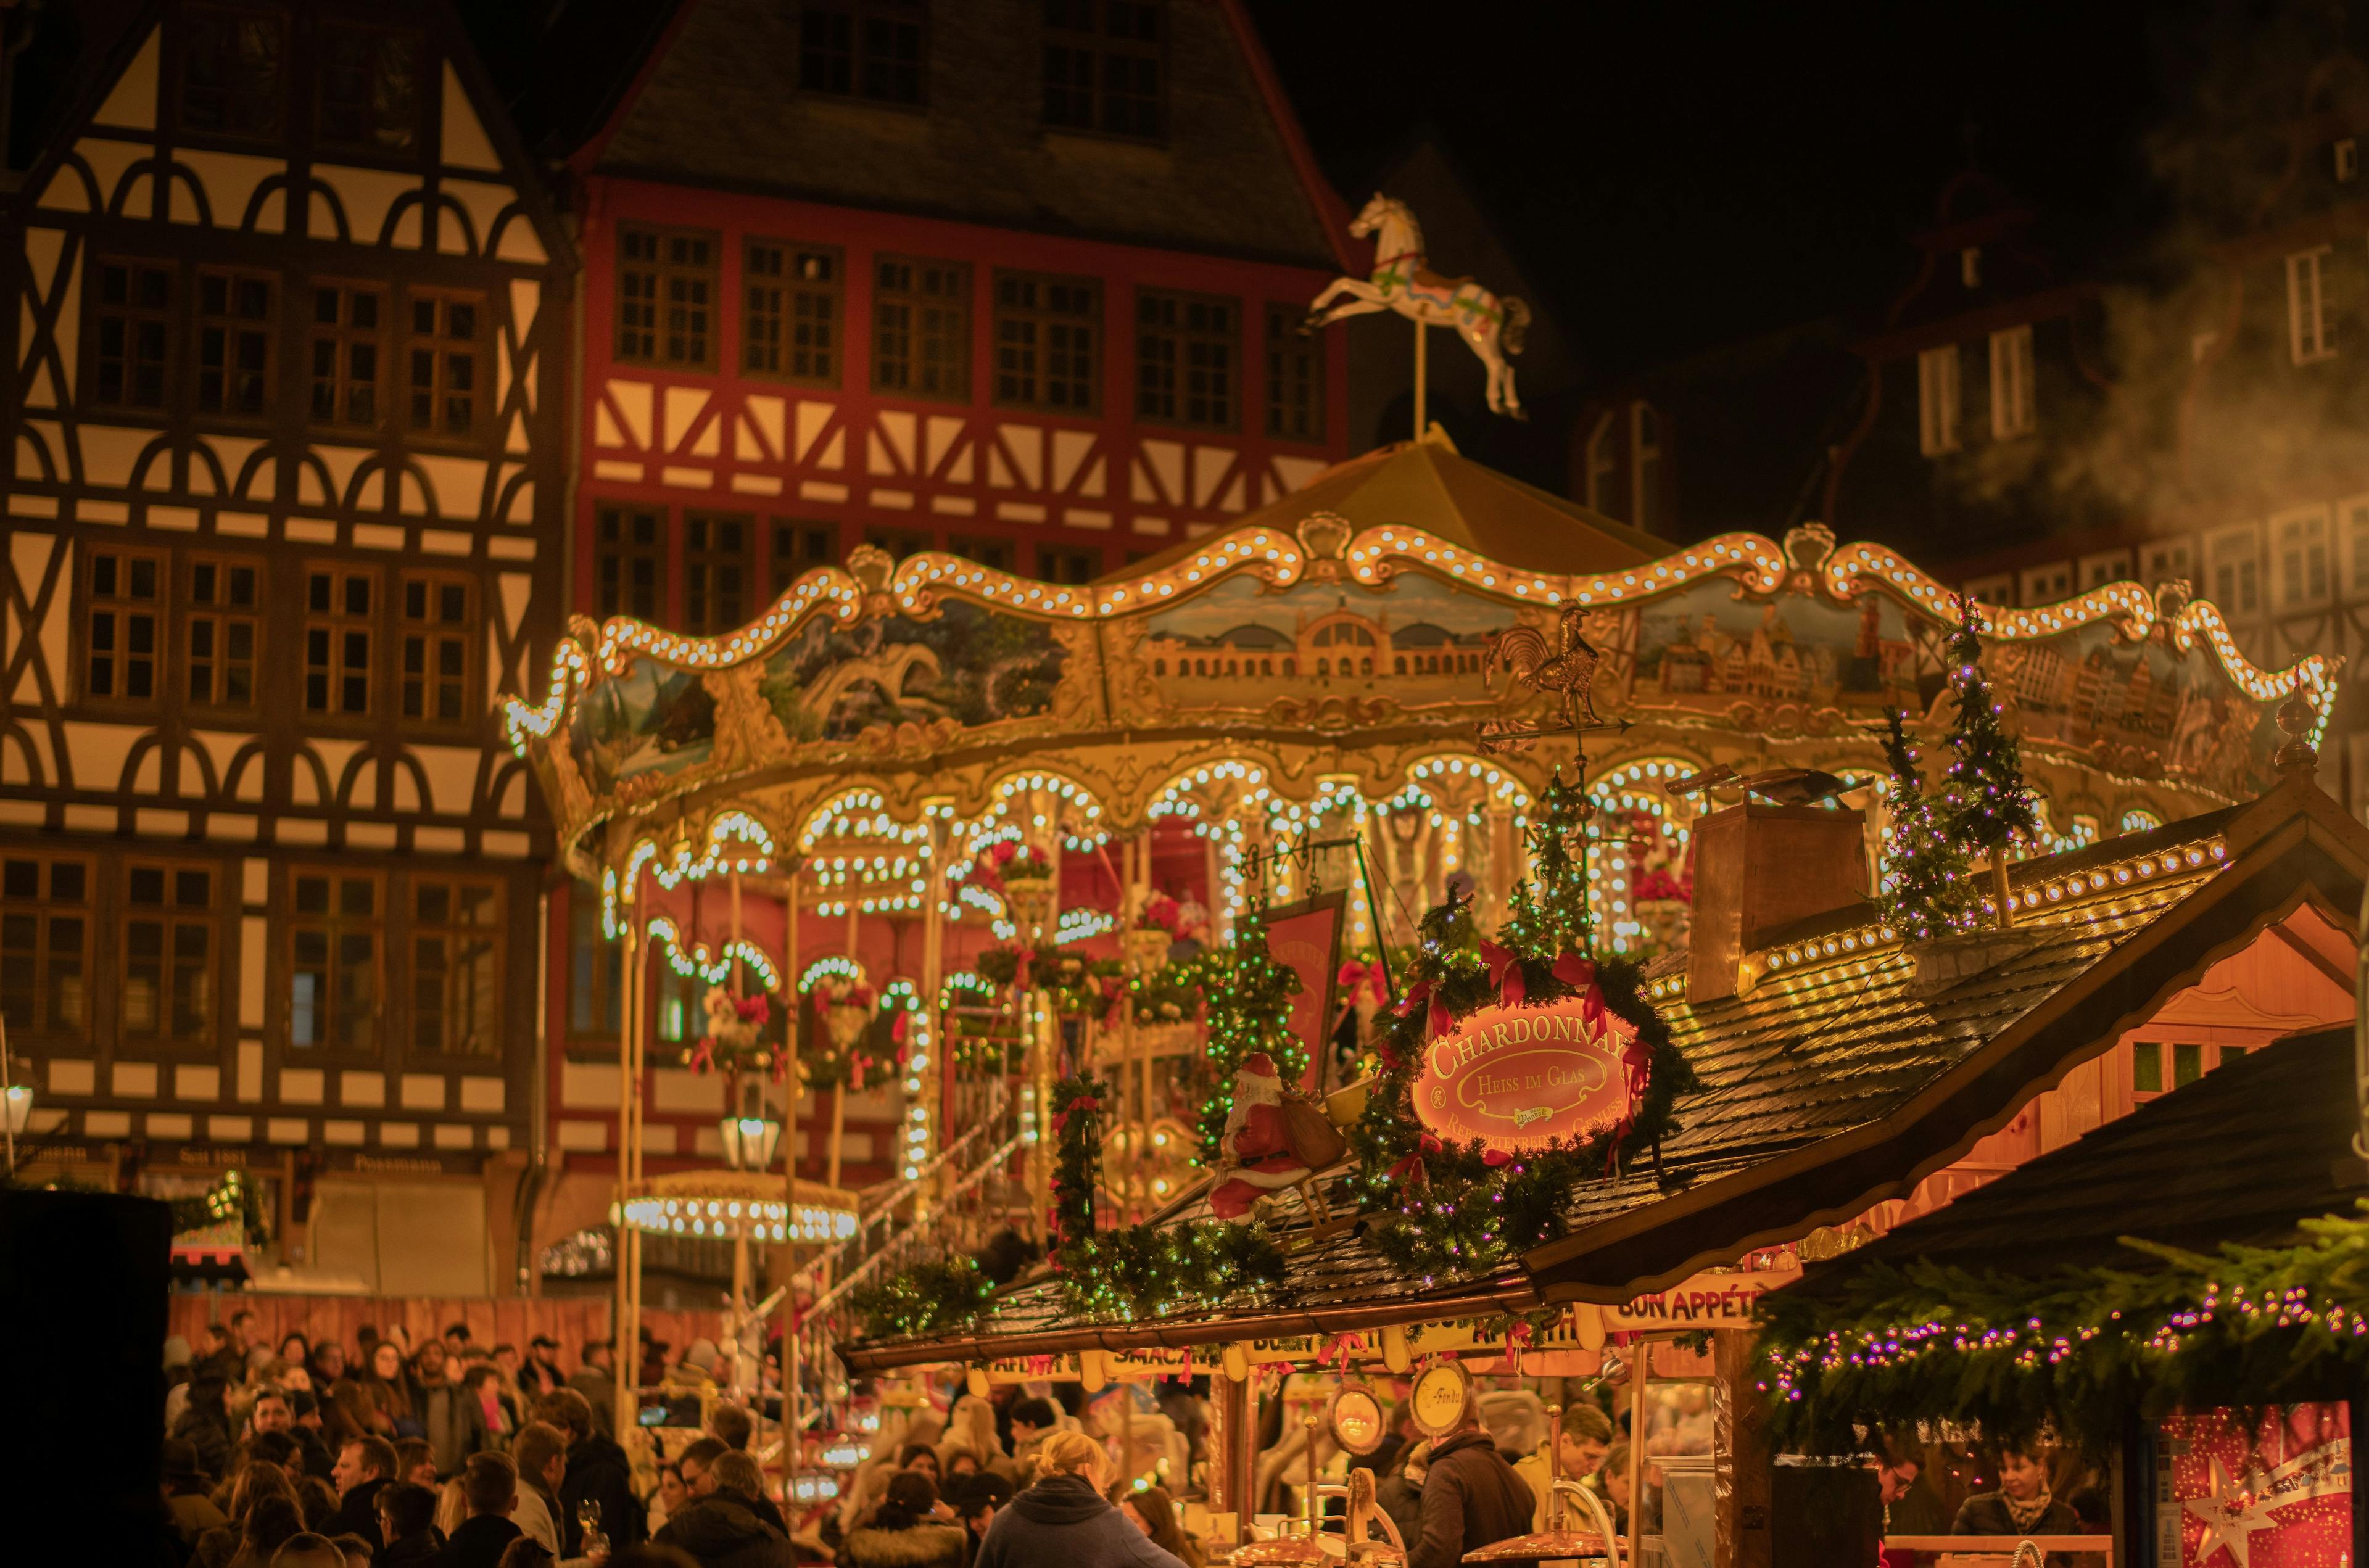 Decorated Christmas market in Germany